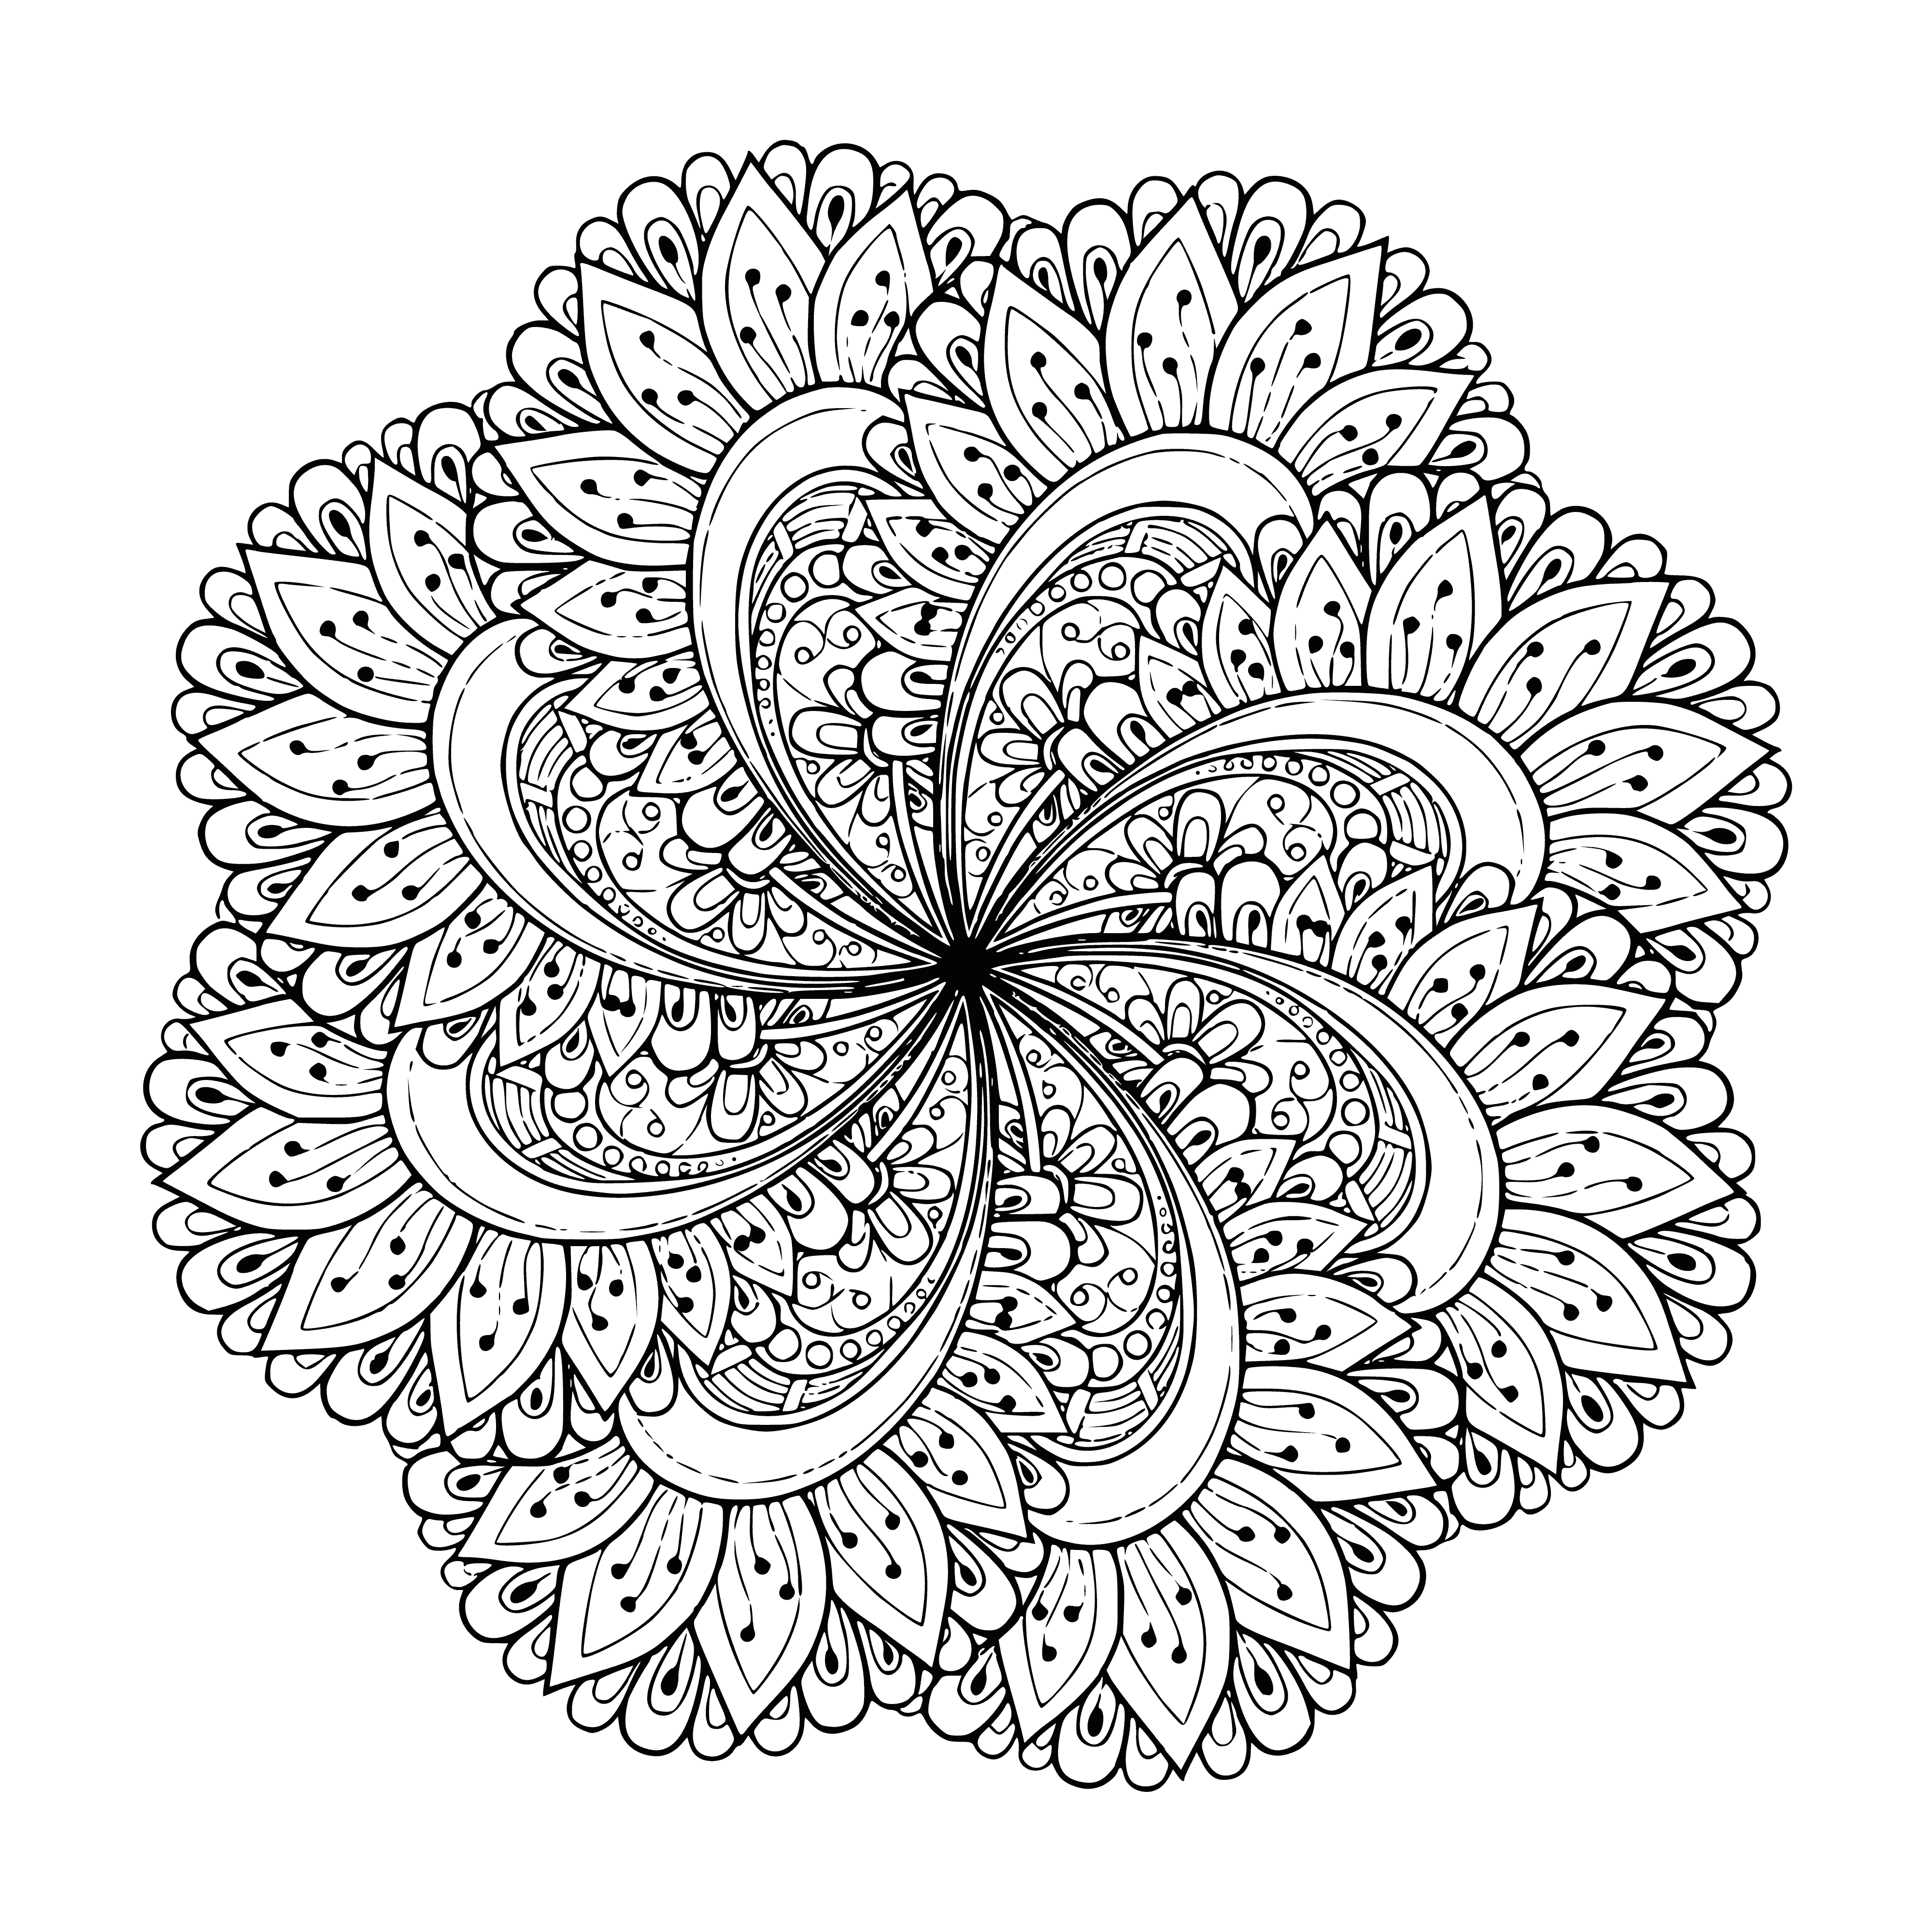 coloring page: A mandala is a spiritual symbol representing the universe, often used as a diagram or pattern to symbolize the cosmos.